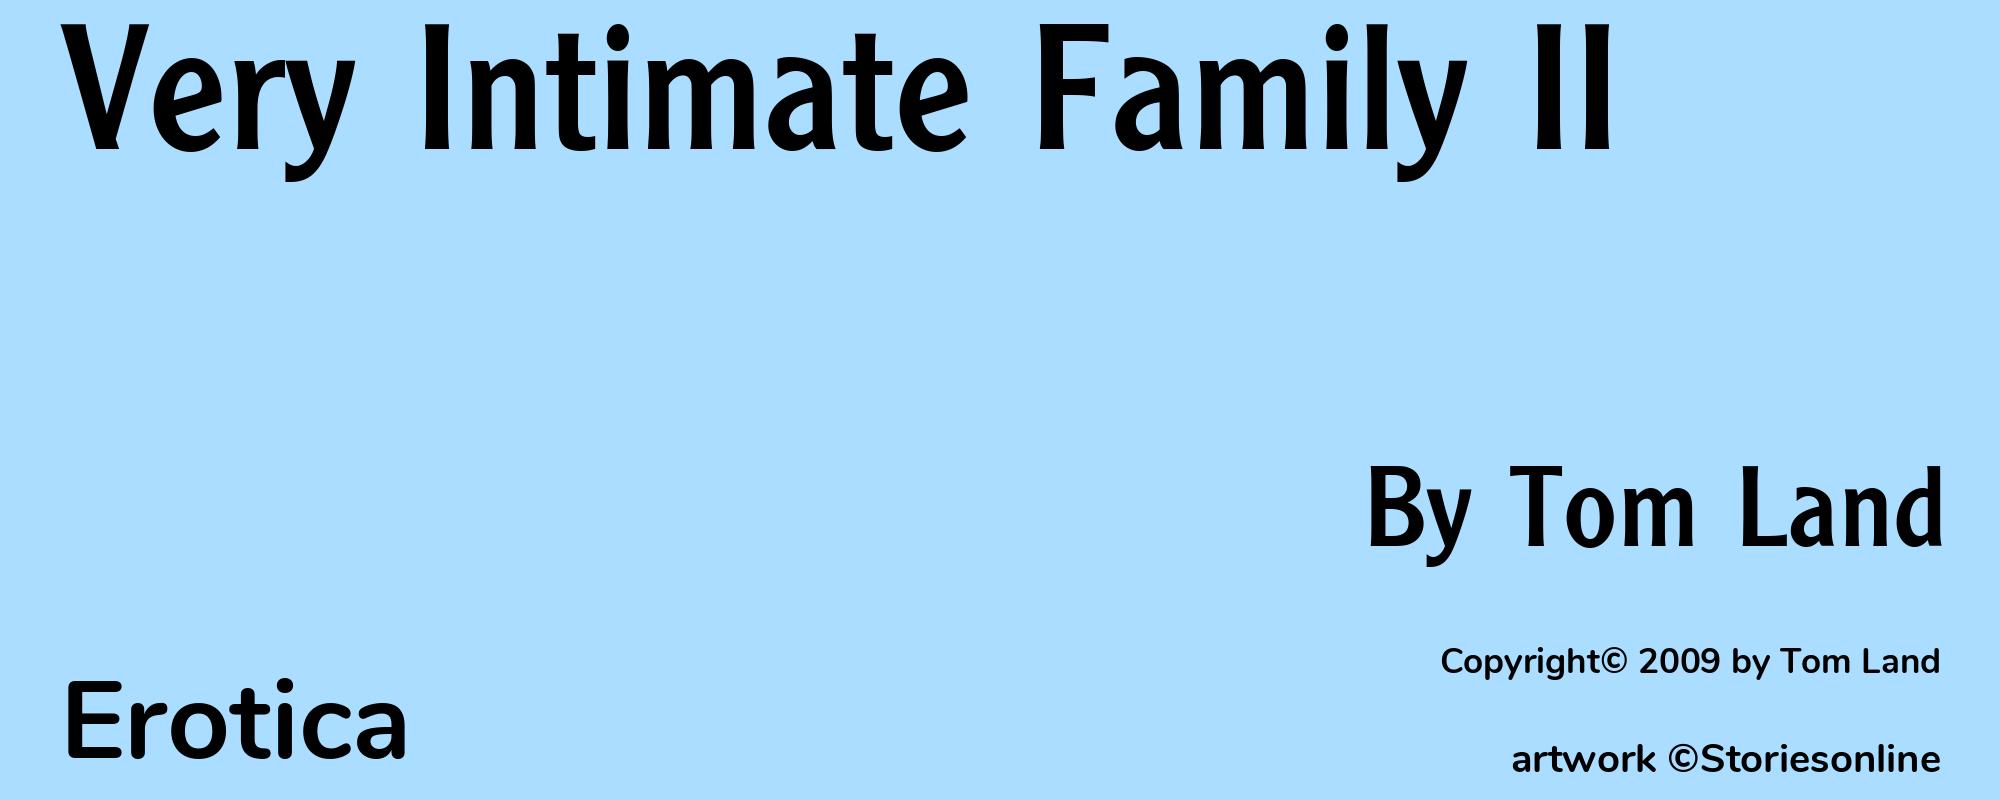 Very Intimate Family II - Cover